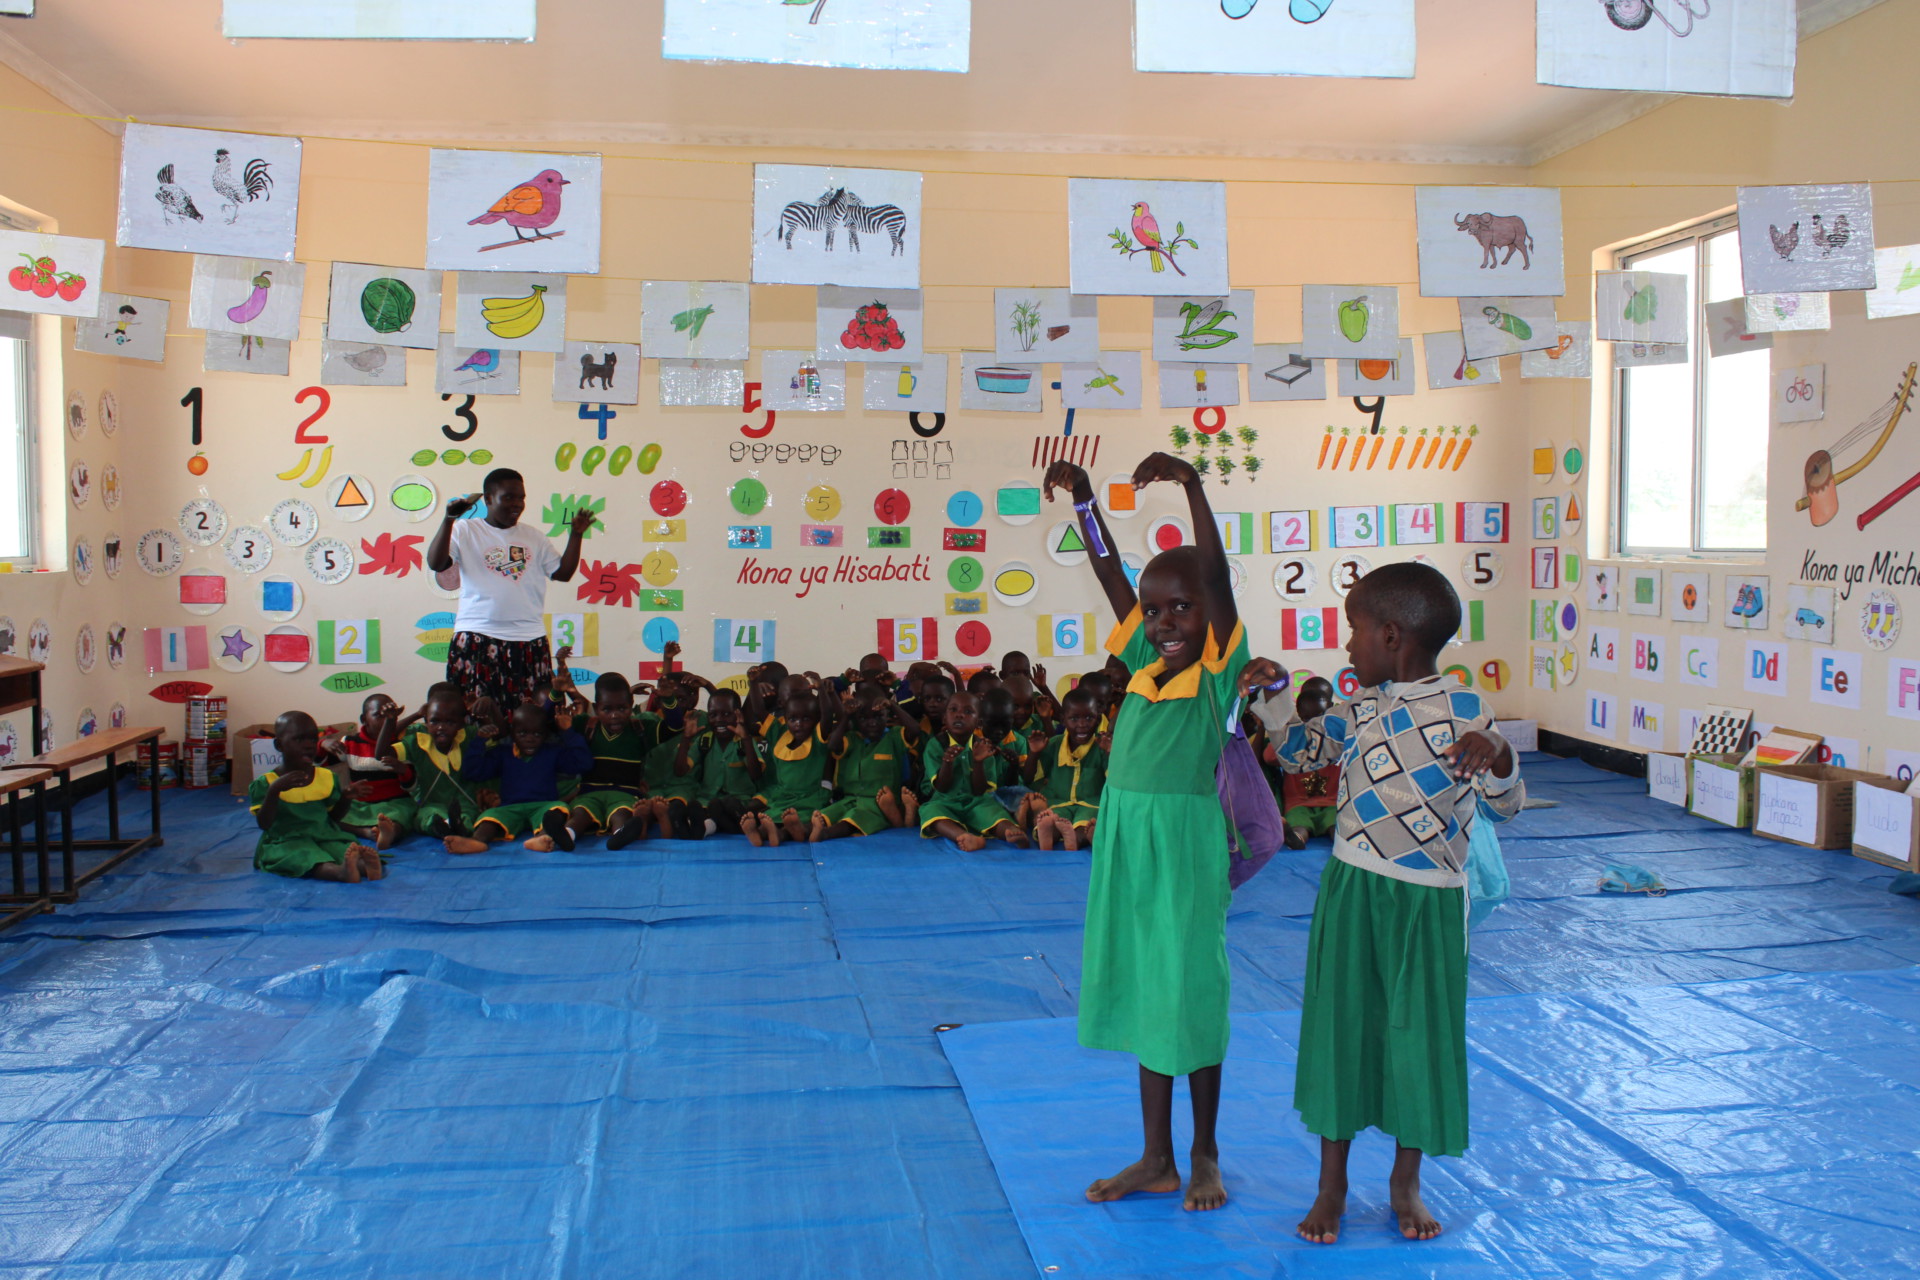 New classrooms in Tanzania are a ‘wonderful legacy to Lauren’